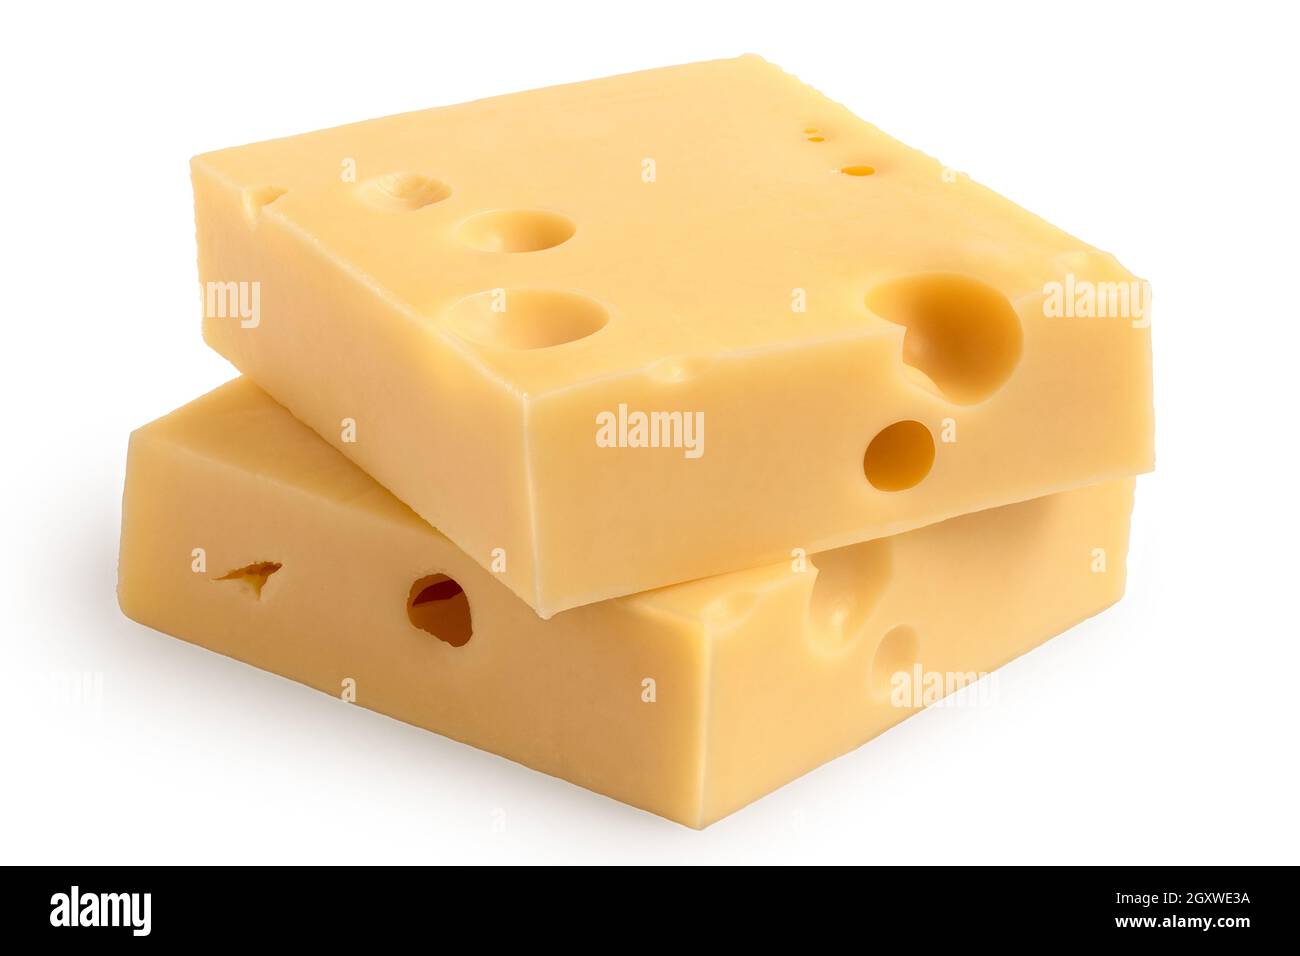 Two blocks of emmental cheese on top of each other isolated on